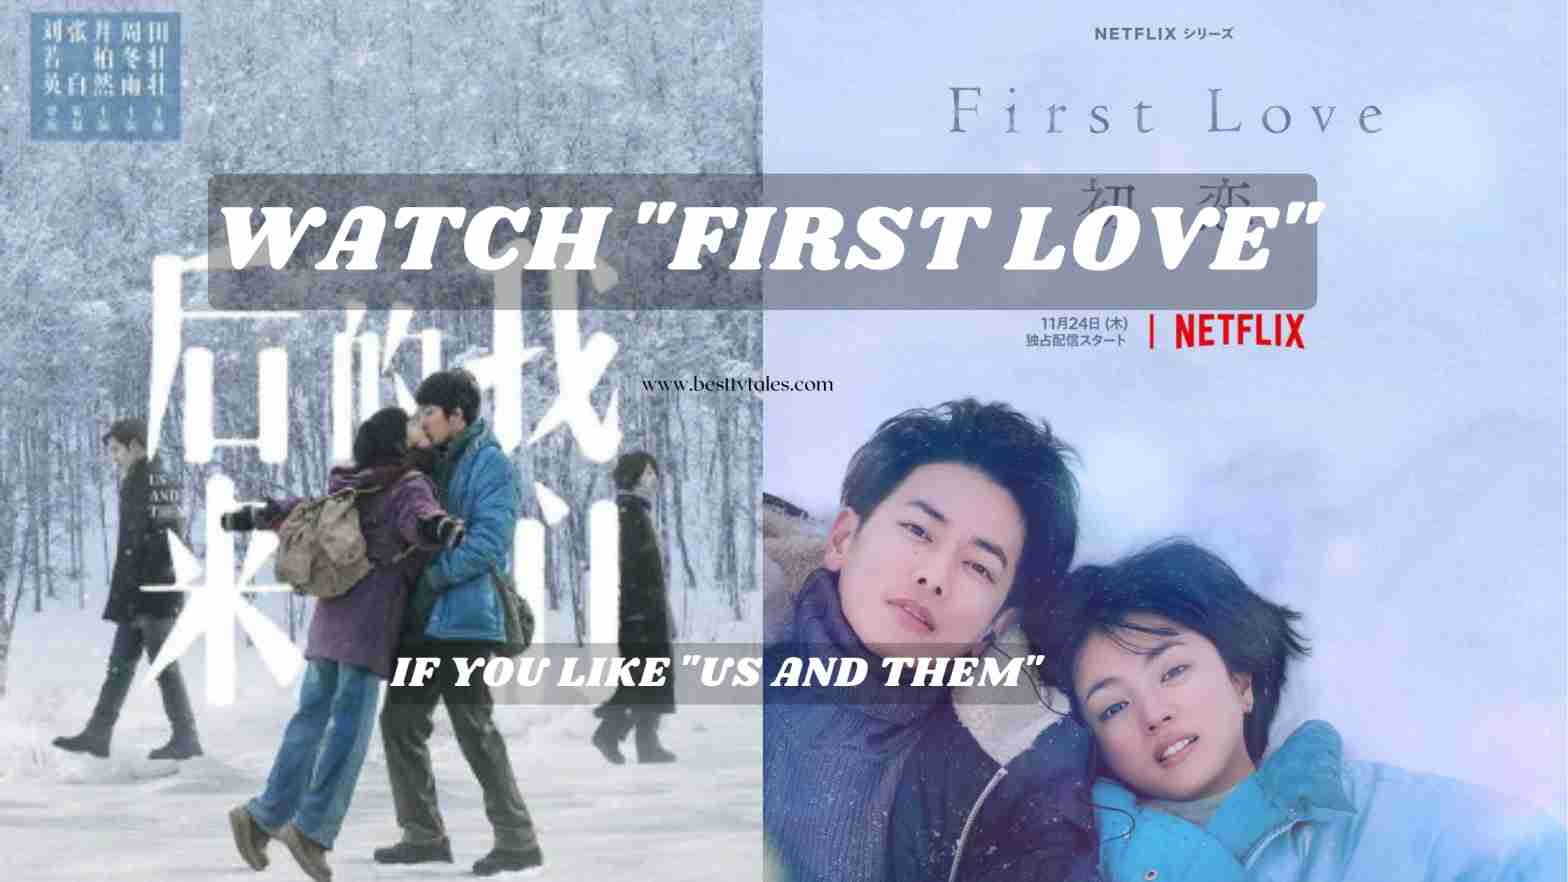 Watch ‘First Love’ If You Like ‘Us And Them’